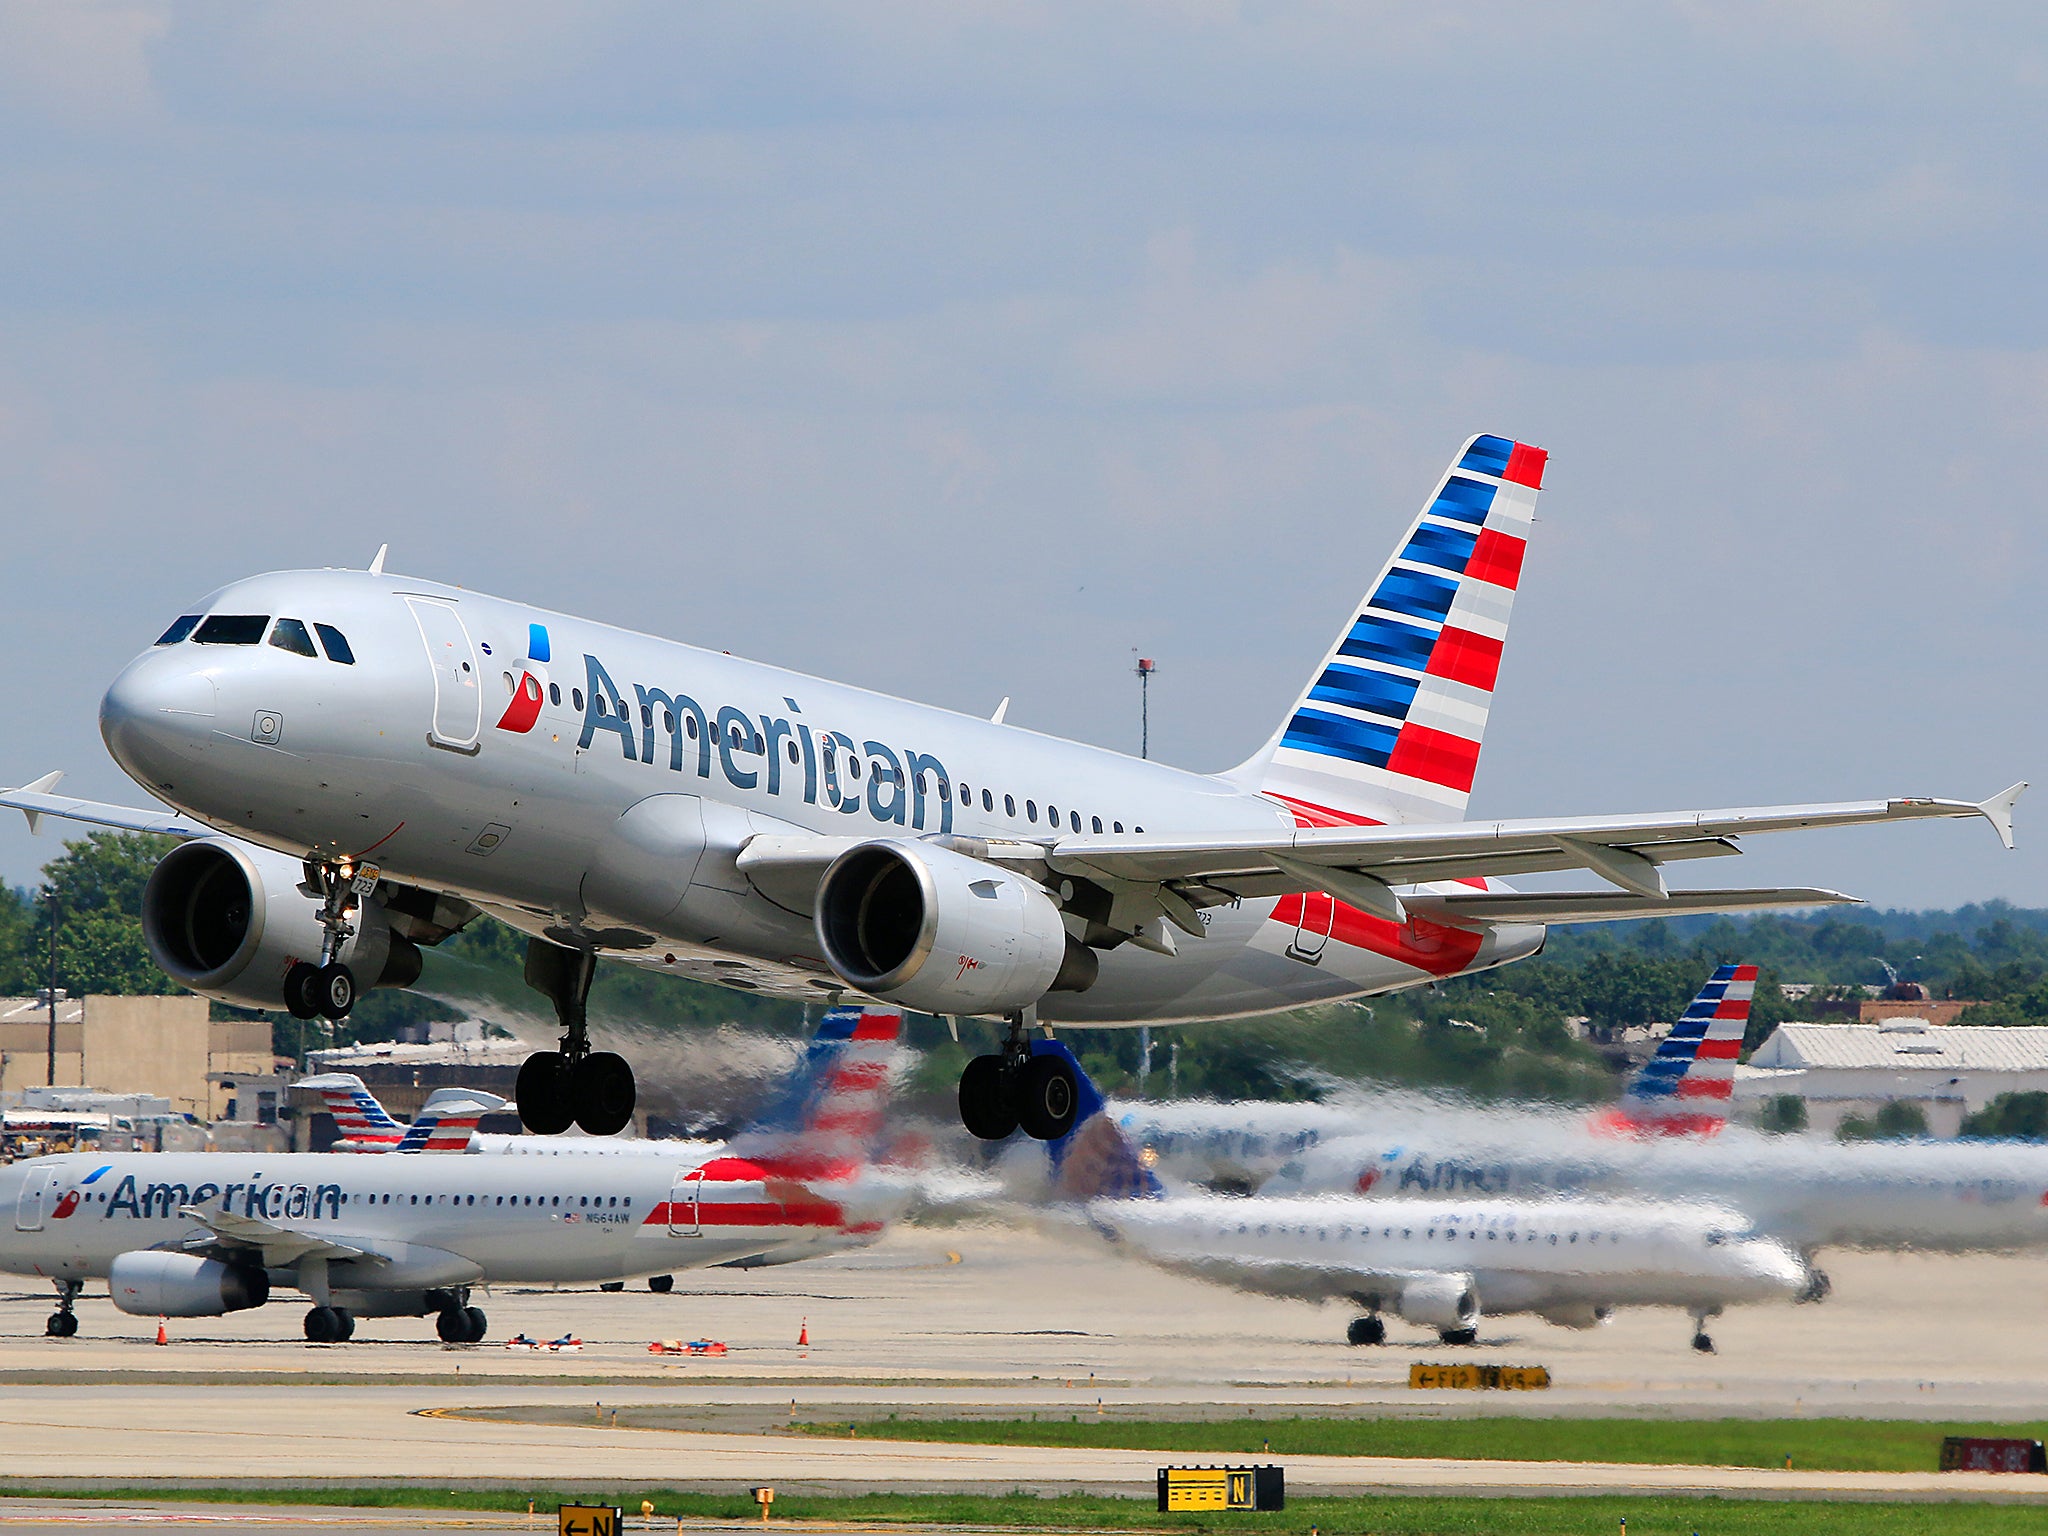 American Airlines came top of OAG’s rankings (iStockphoto)